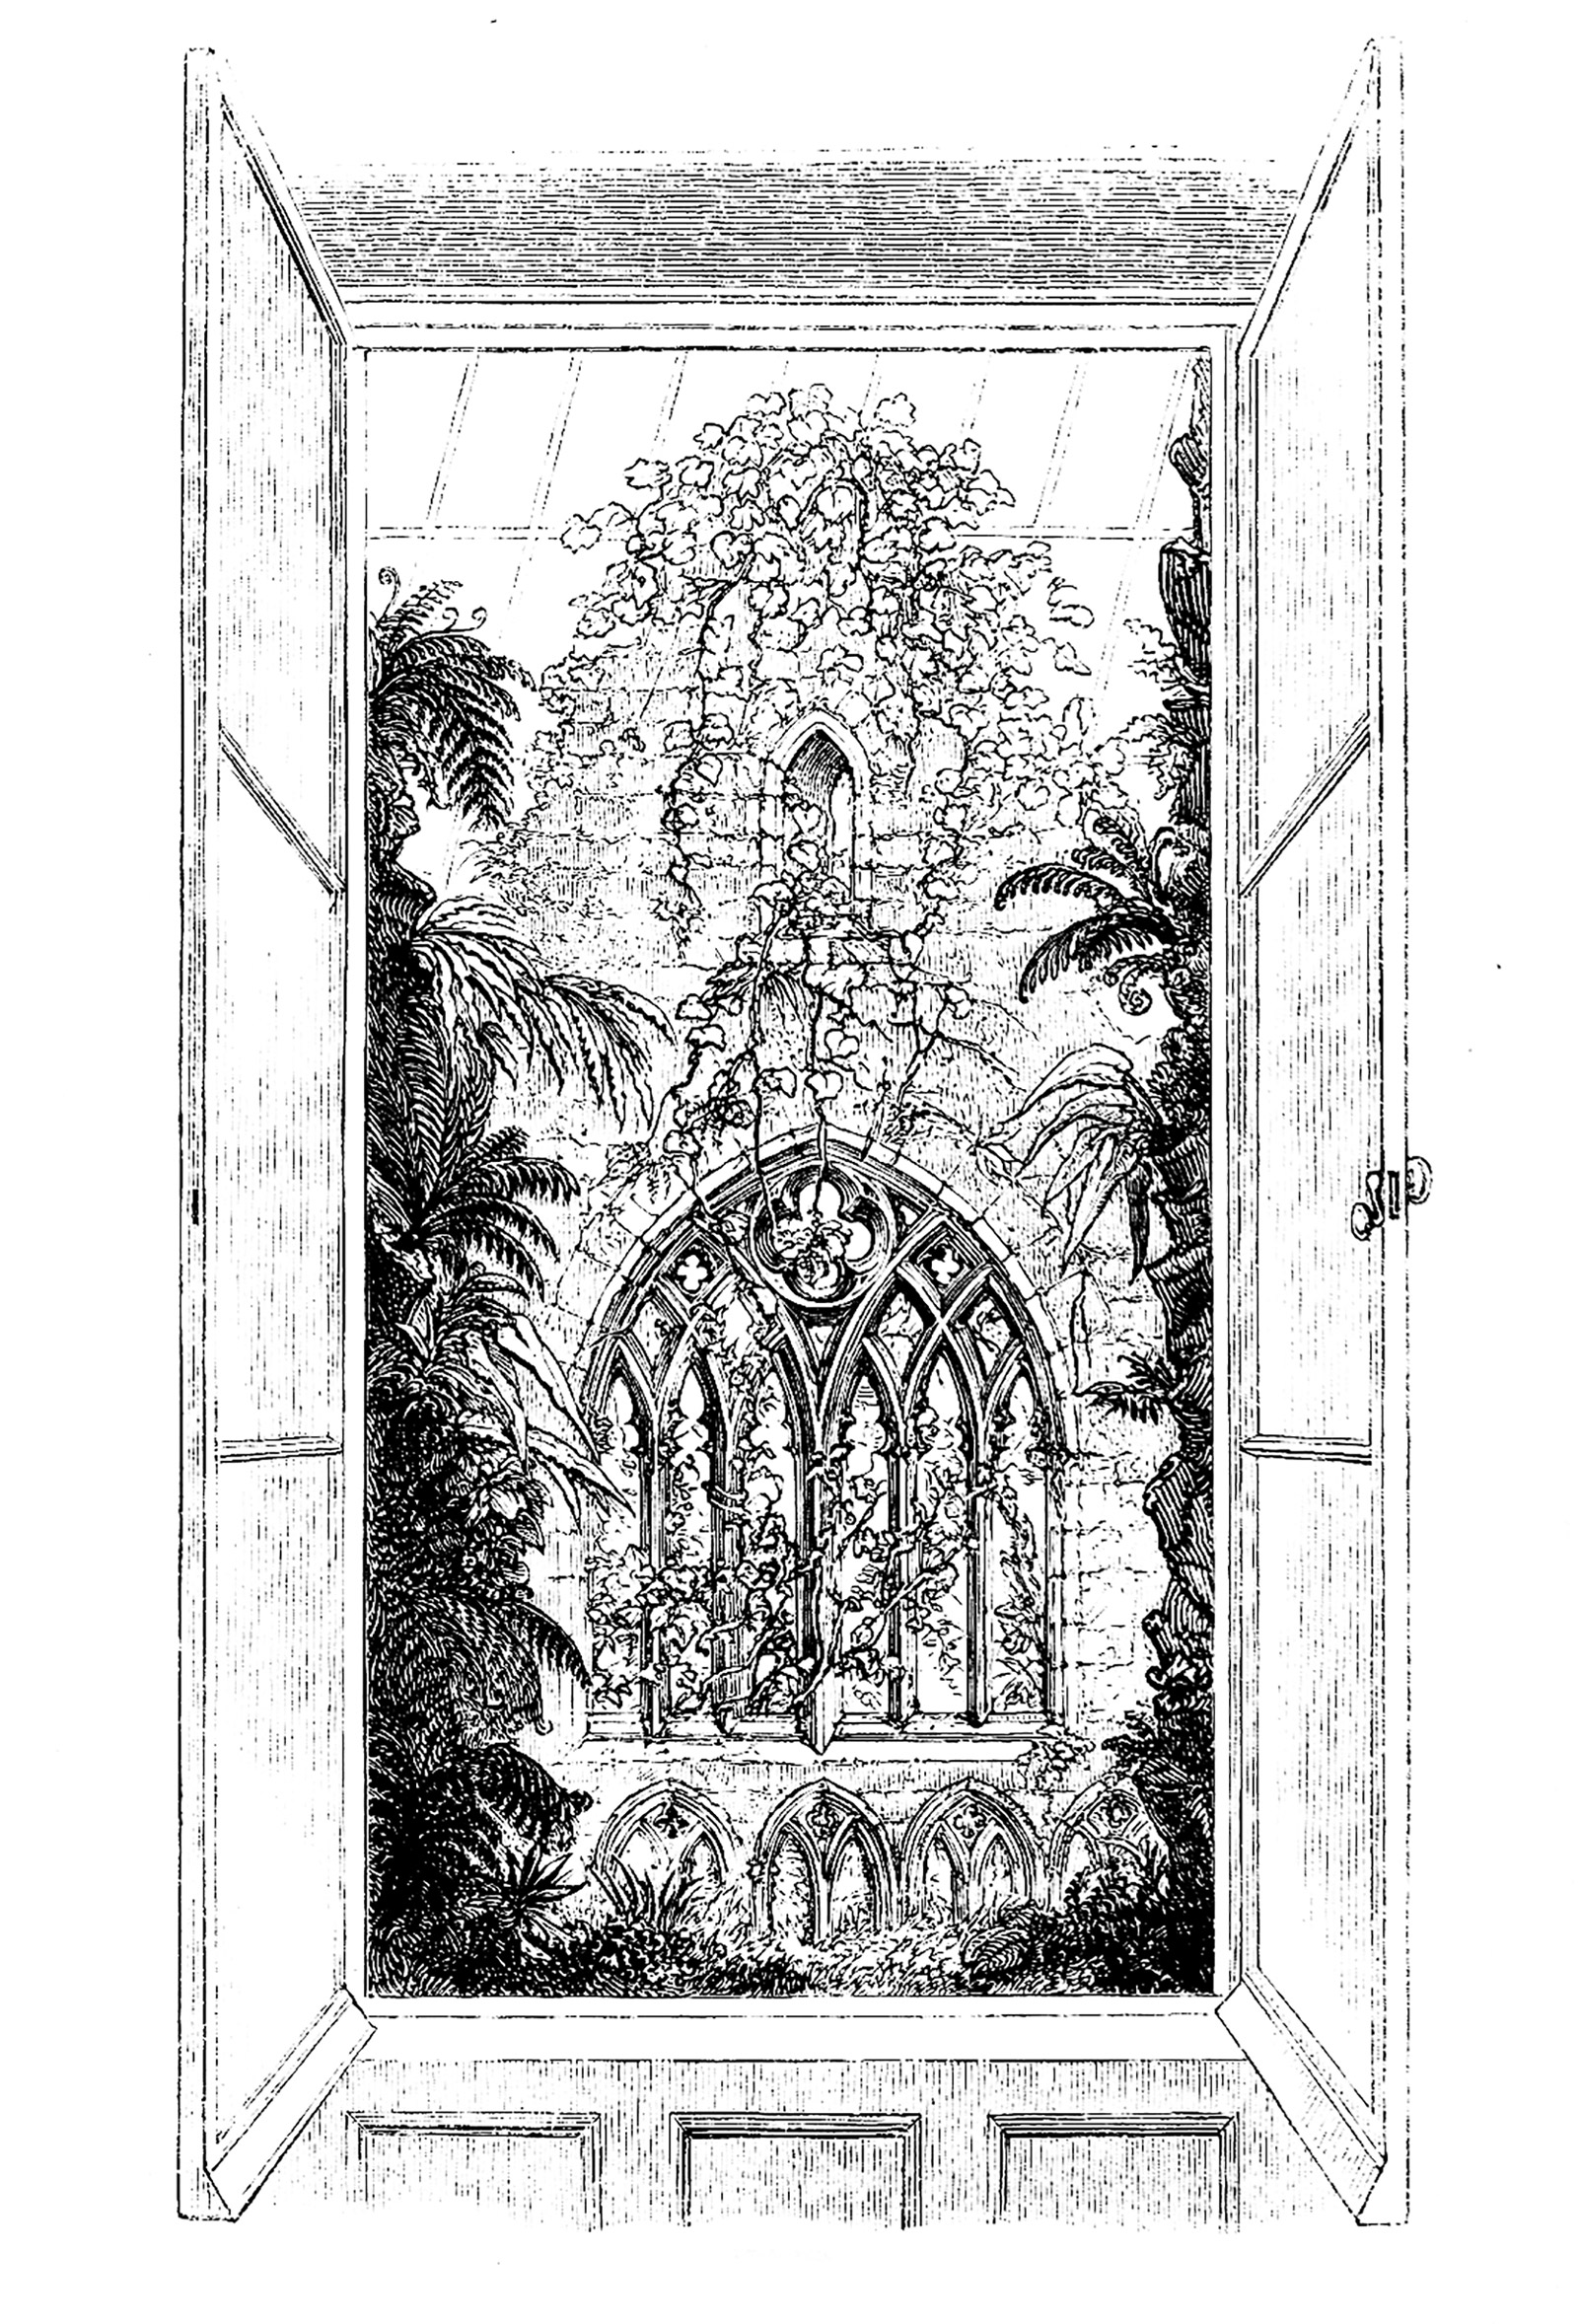 An eighteen fifty two illustration of a Wardian case of plants attached to the exterior of windows at the ruins of Tintern Abbey. The illustration appears in Nathaniel Ward’s “On the Growth of Plants in Closely Glazed Cases.”